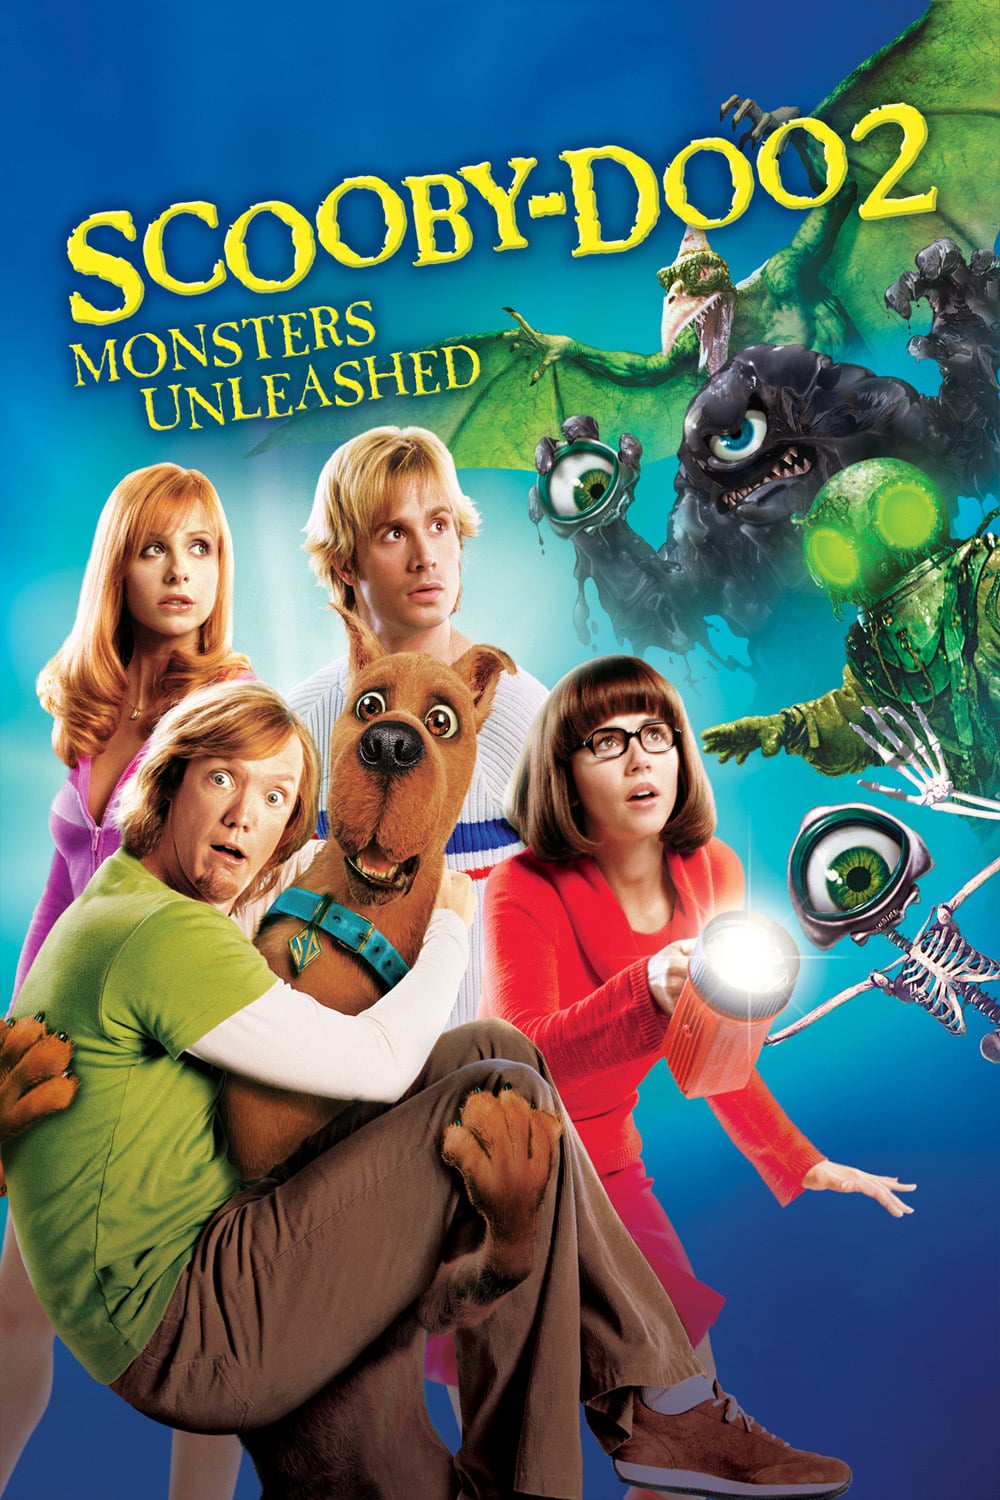 scooby doo 2 monsters unleashed pc beat black night at jousting